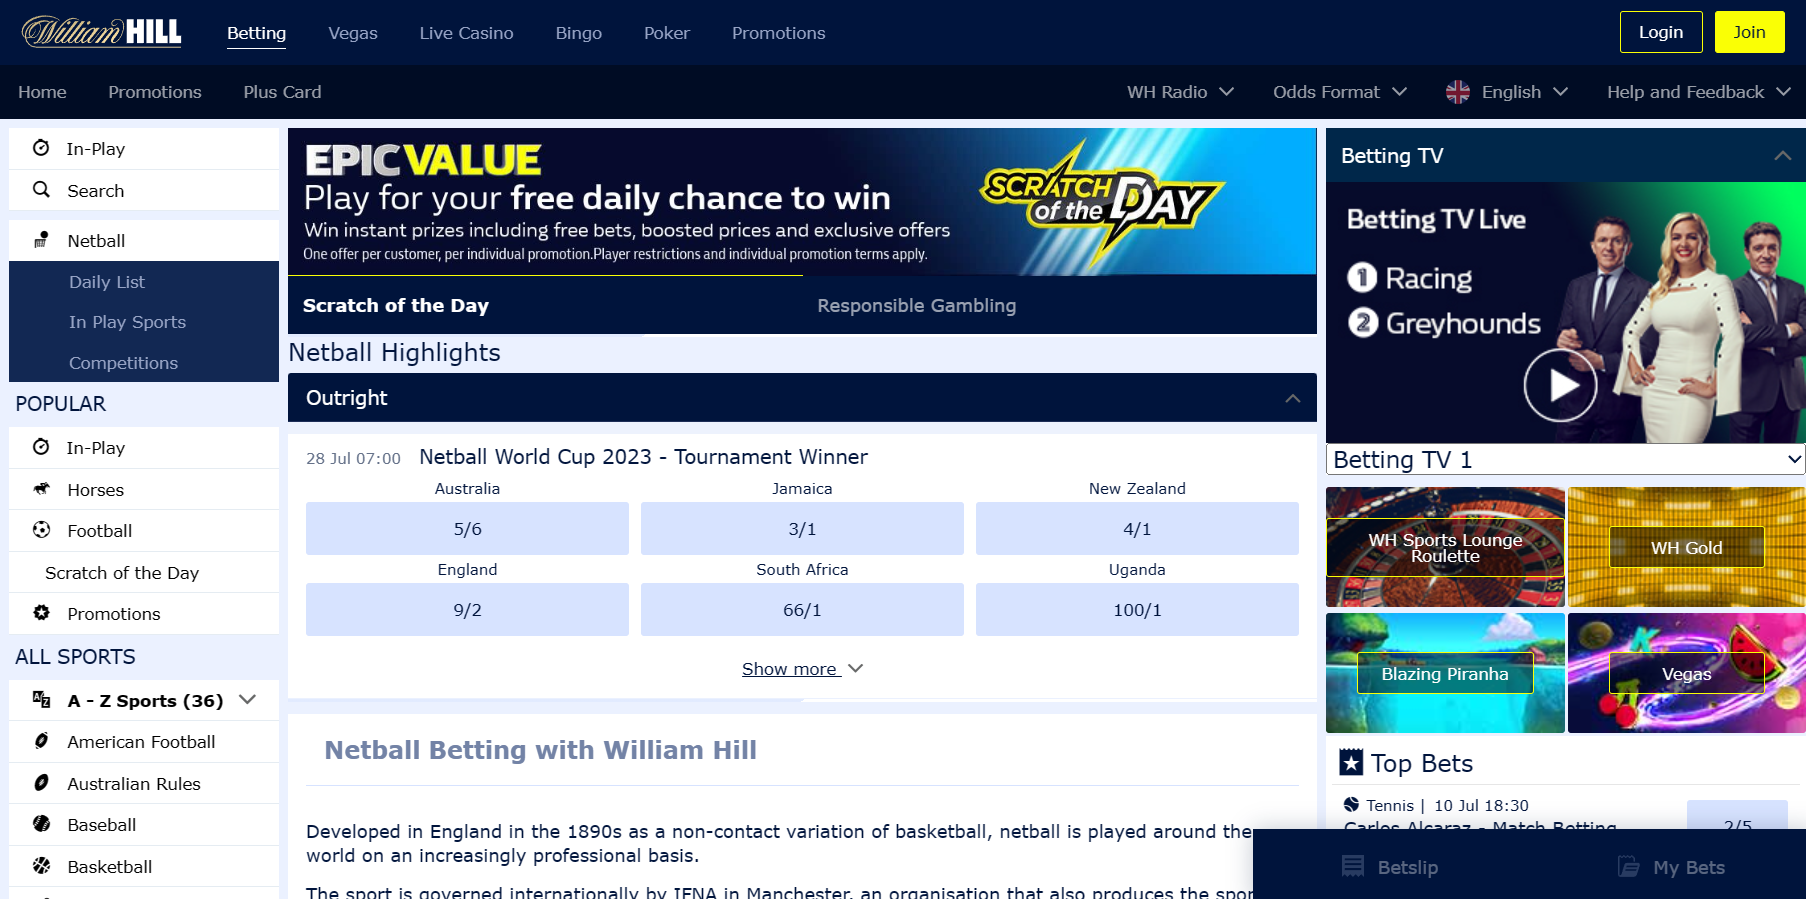 Netball betting at William Hill